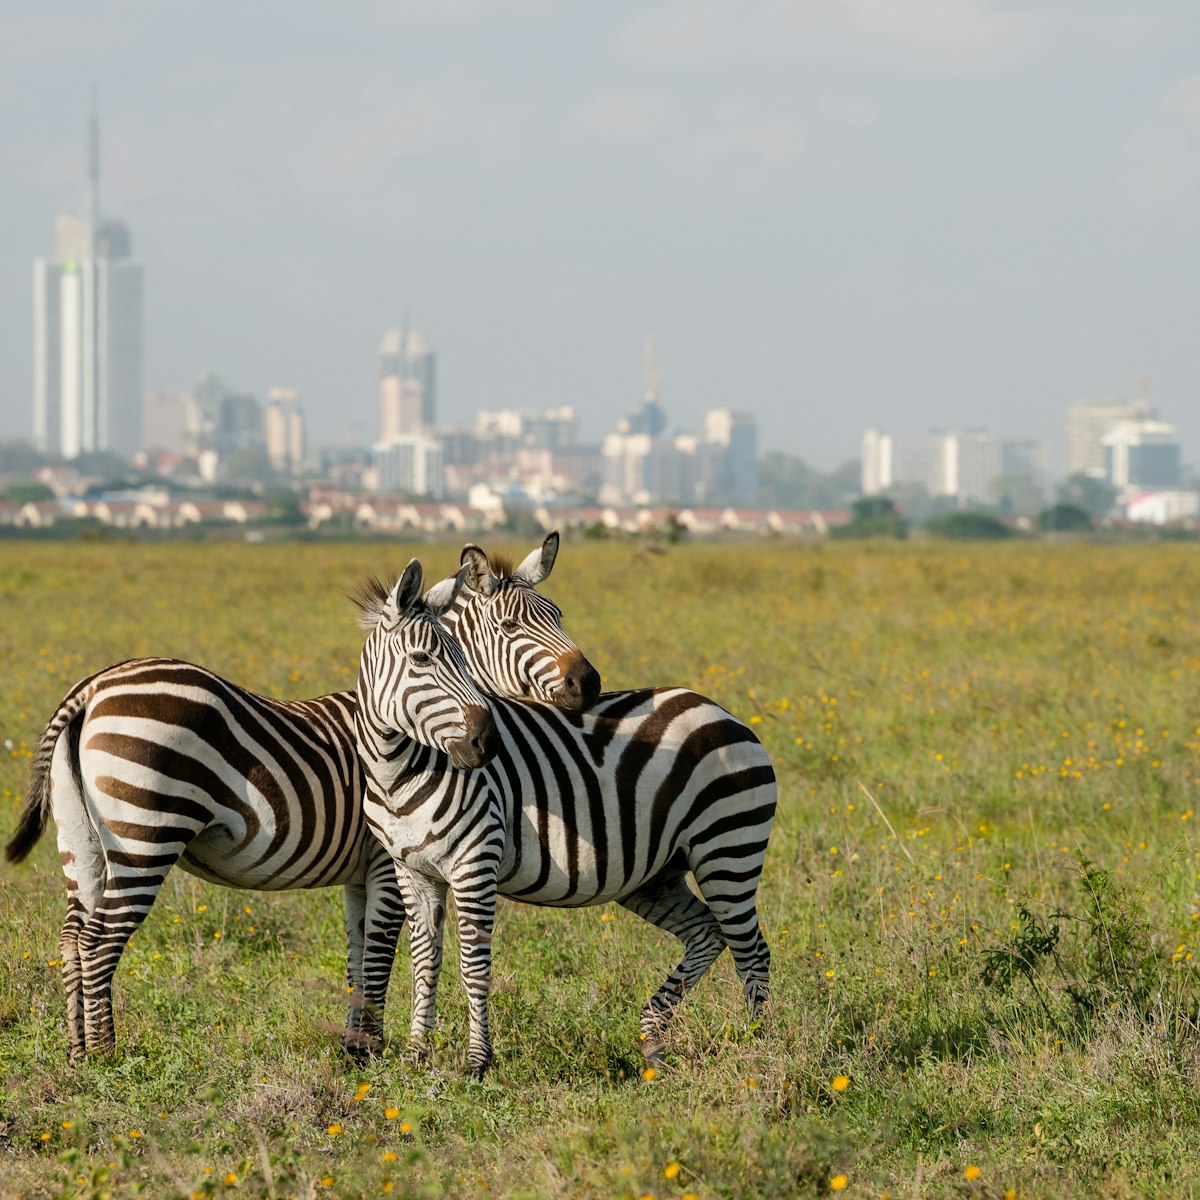 Zebras in a field at Nairobi National Park with Nairobi city in the background.